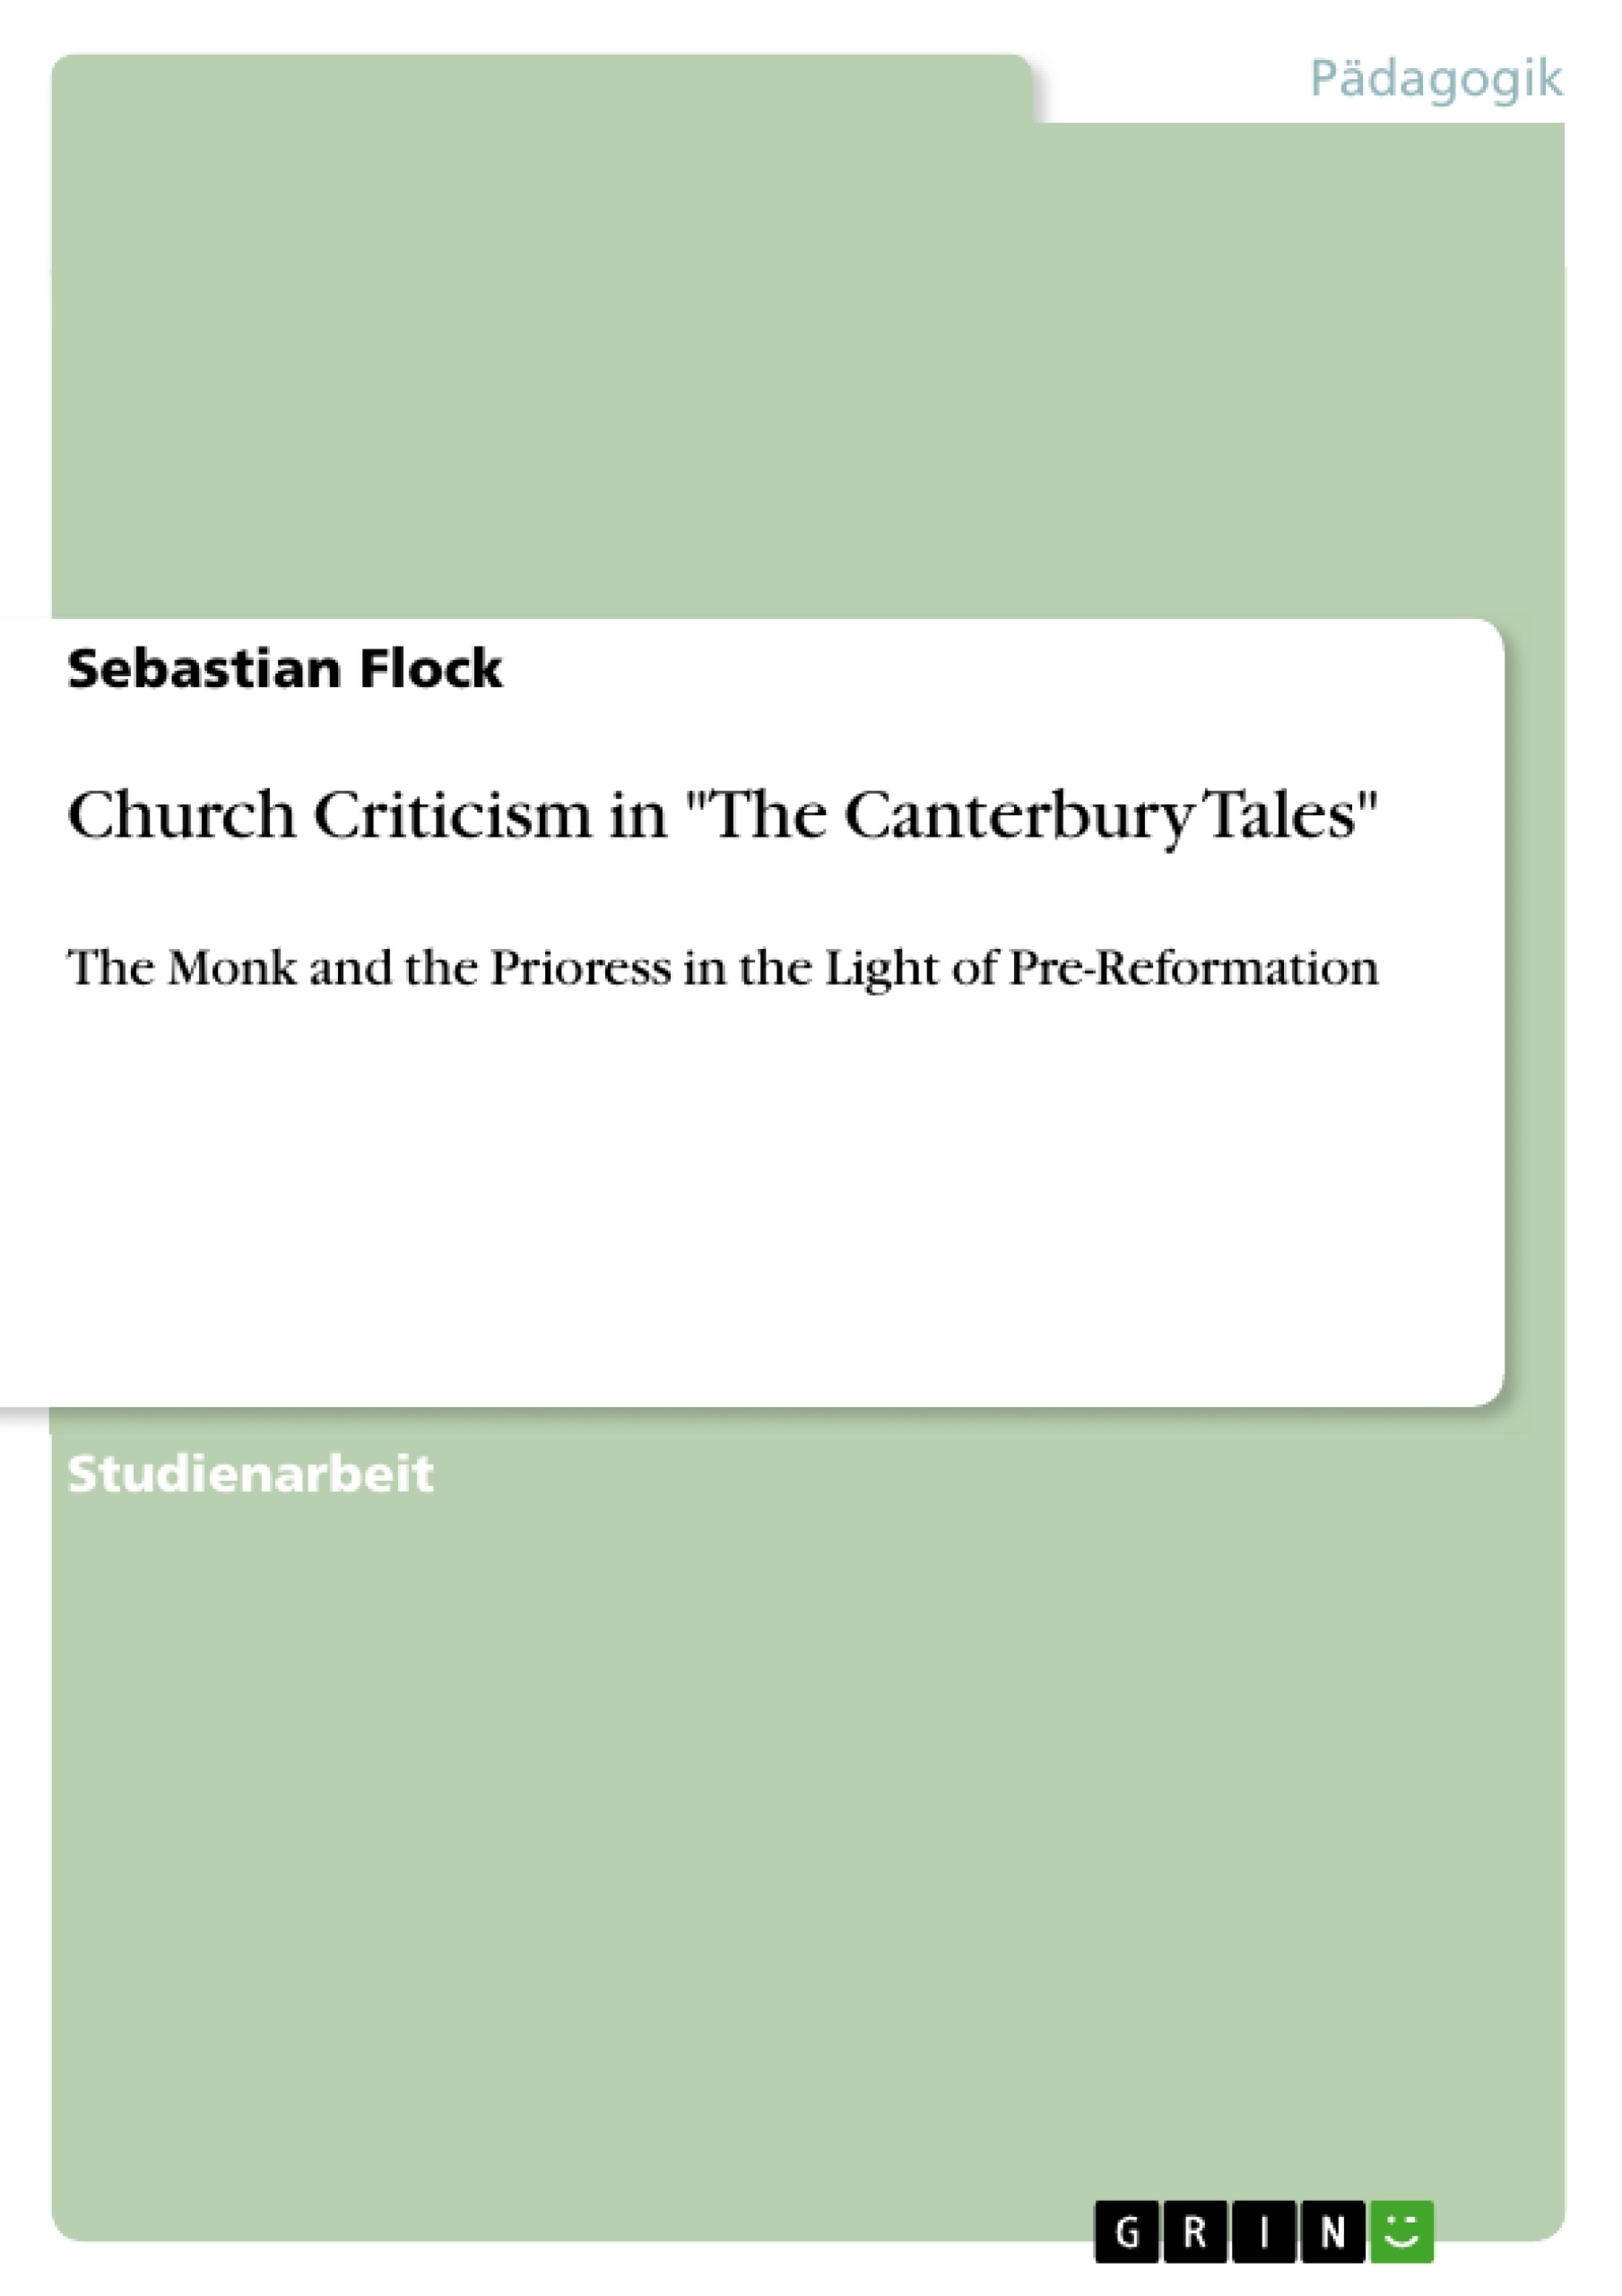 Church Criticism In "The Canterbury Tales" - Grin